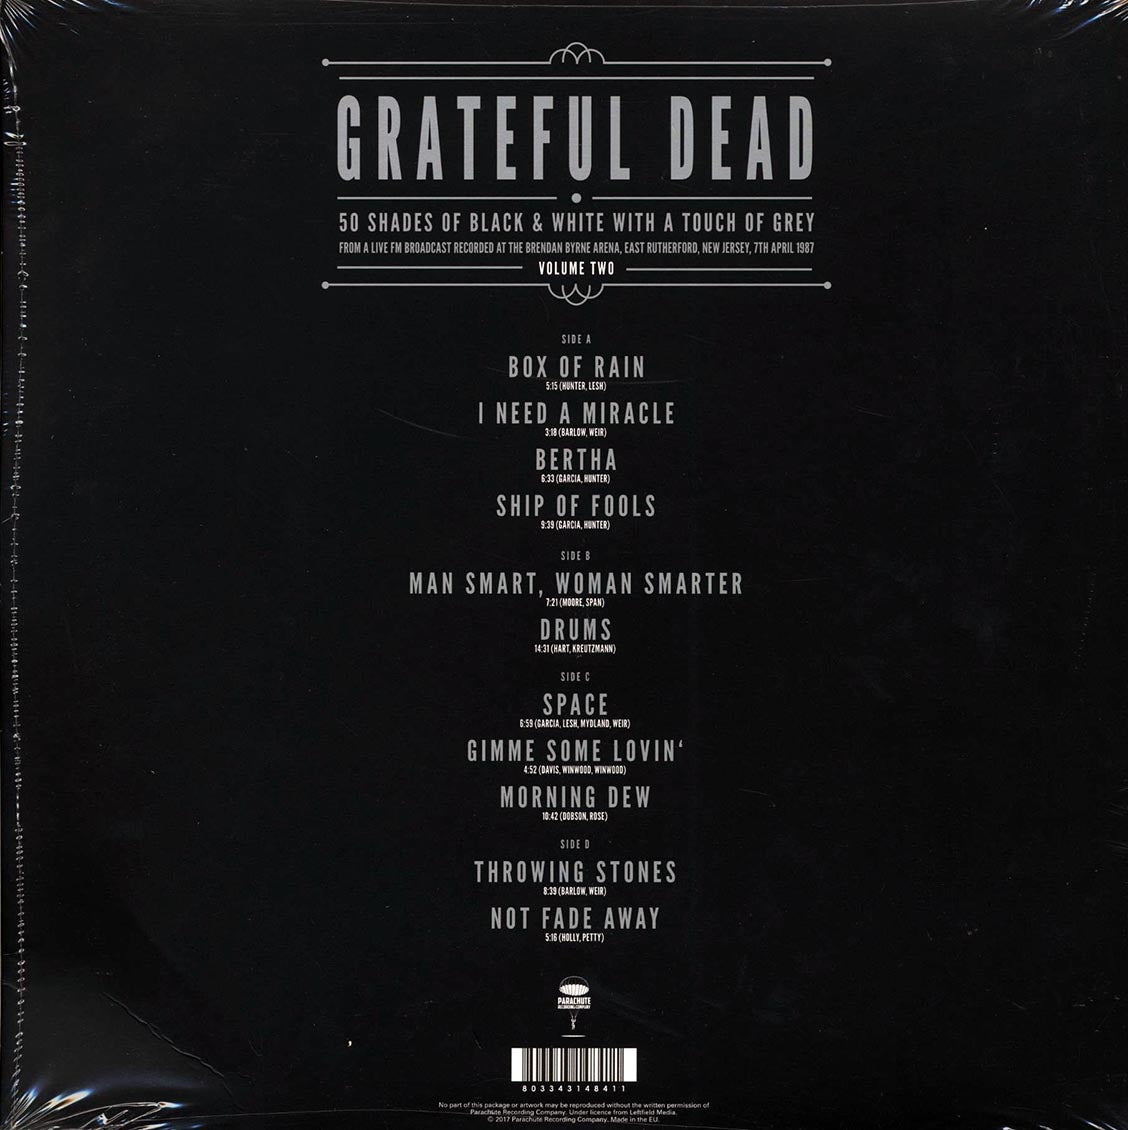 Grateful Dead - 50 Shades Of Black & White With A Touch Of Grey Volume 2: Brendan Byrne Arena, East Rutherford, New Jersey, 7th April 1987 (2xLP) - Vinyl LP, LP